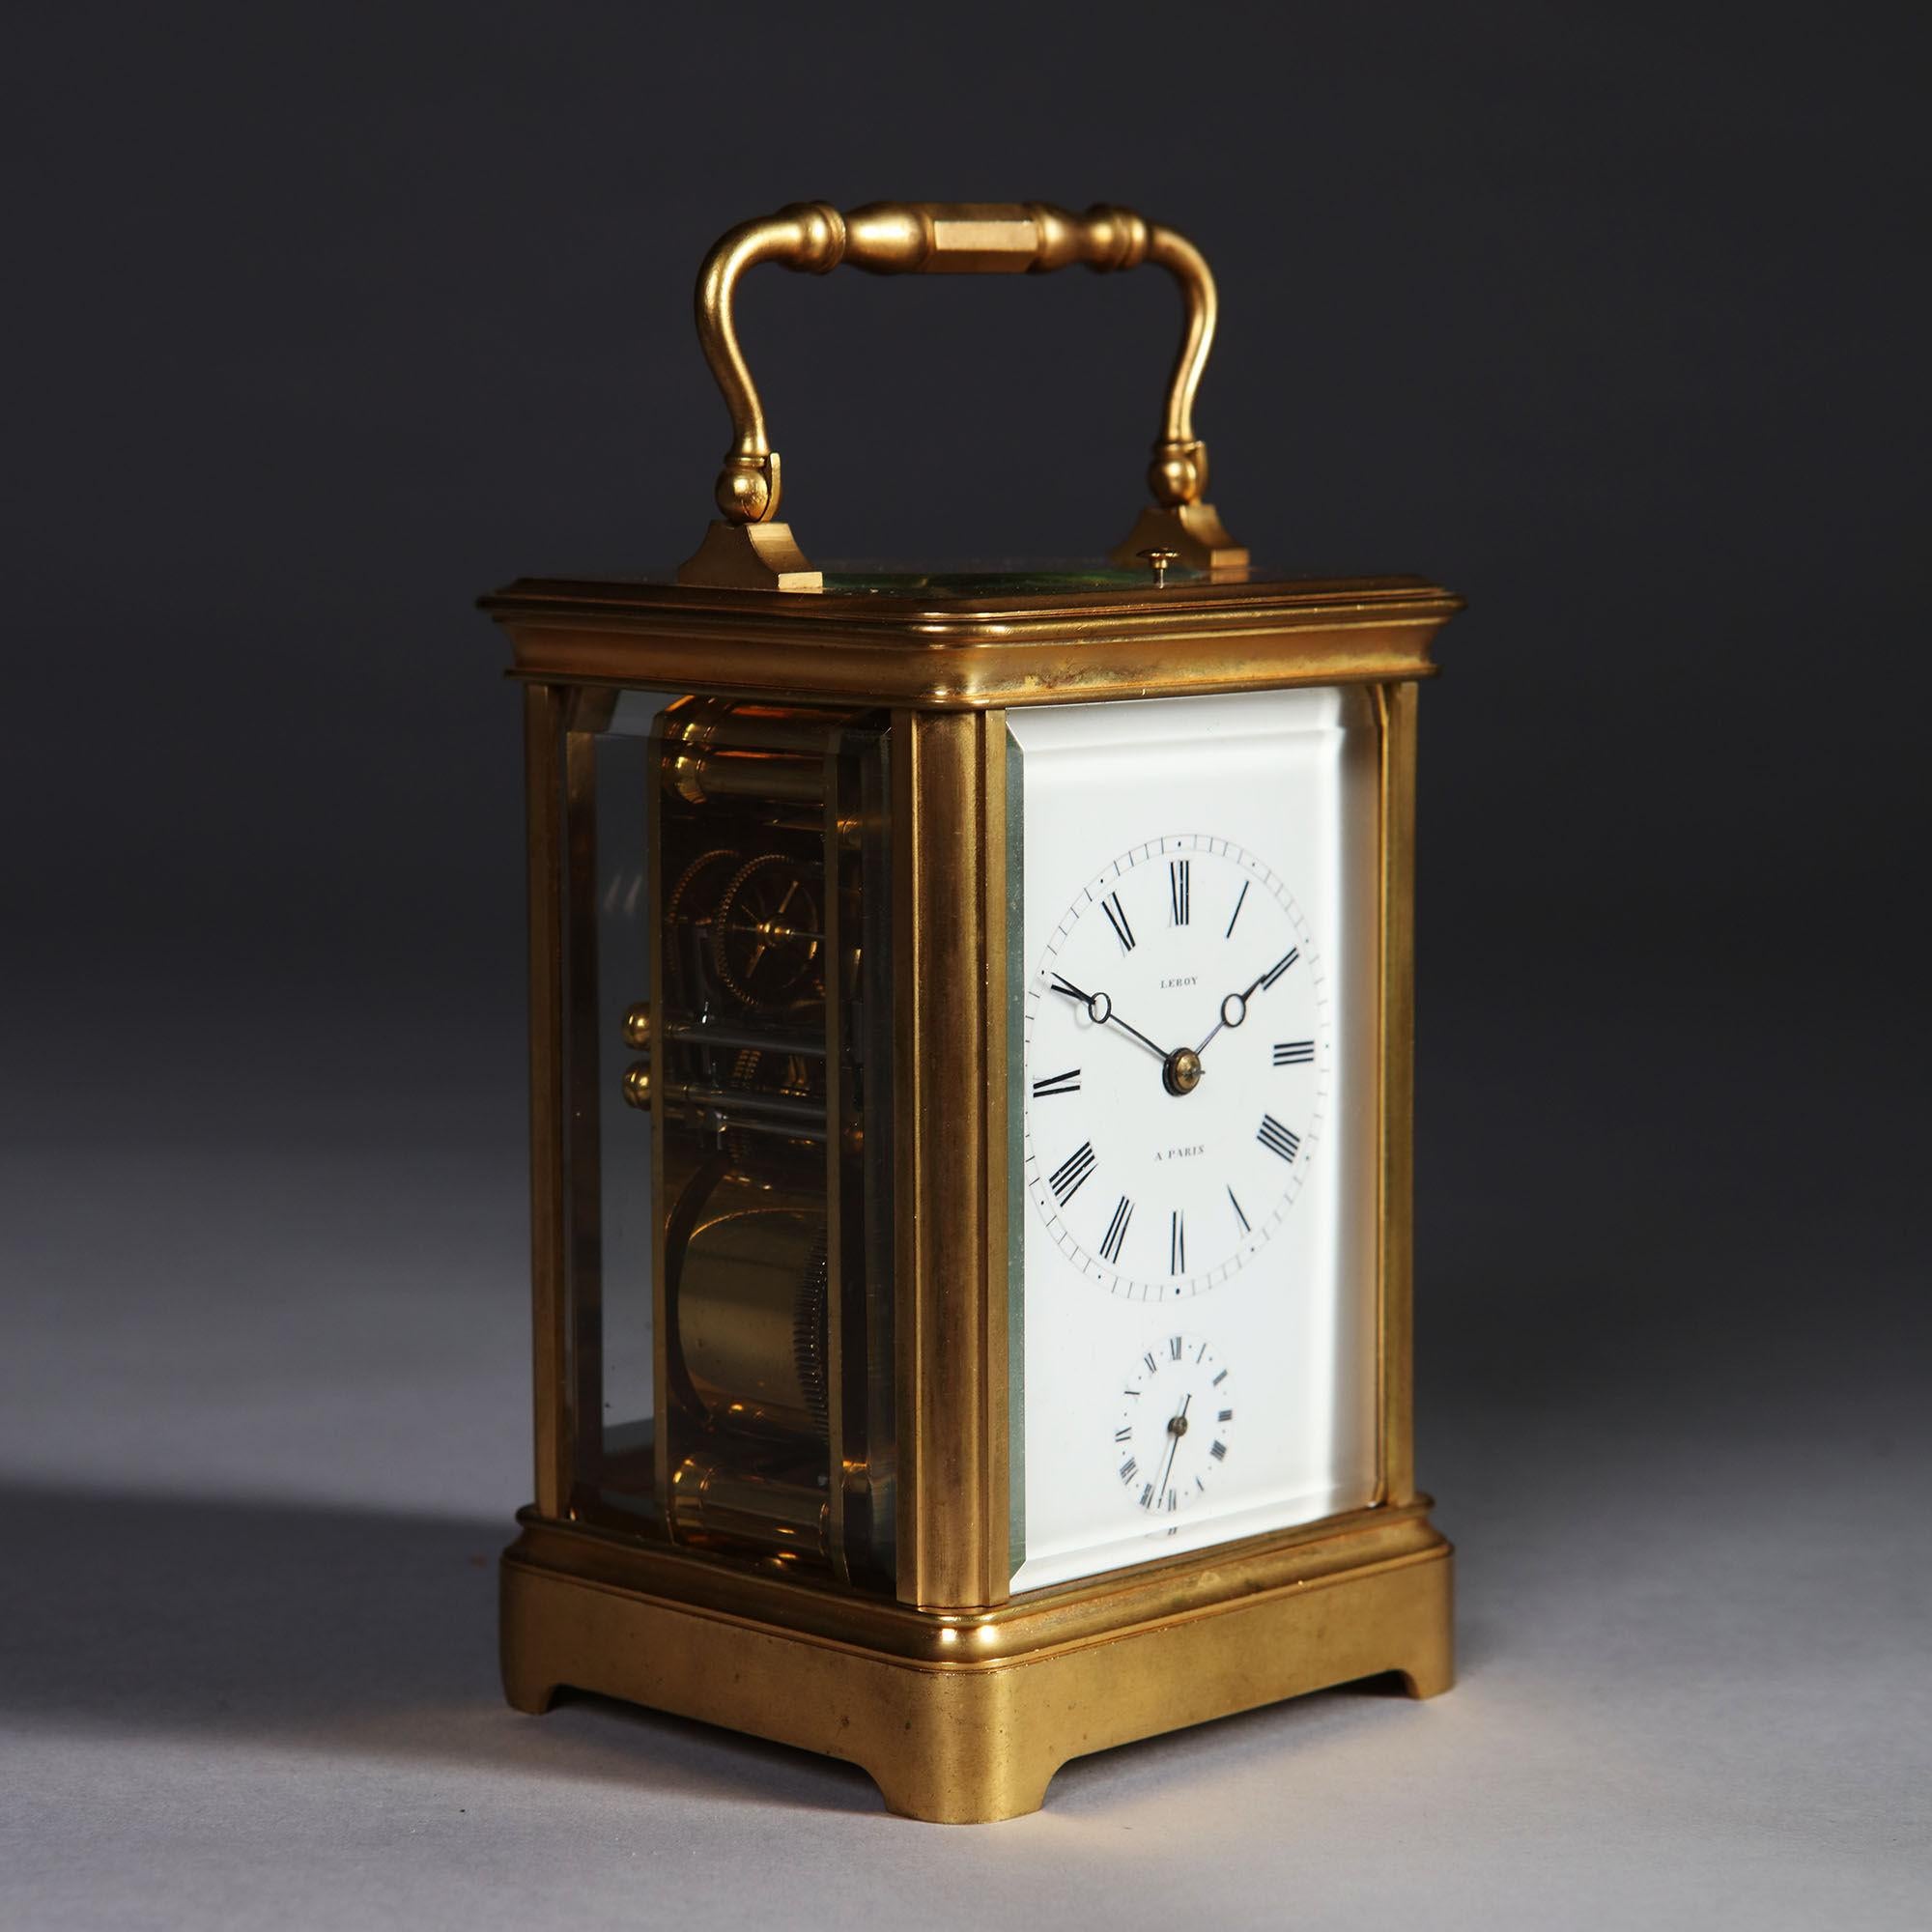 The gilt-brass, so-called corniche case has bevelled glass panels on all sides so that the movement is entirely visible. It is surmounted by a shaped carrying handle. The white enamel dial has a Roman chapter ring, with Arabic five-minute and minute